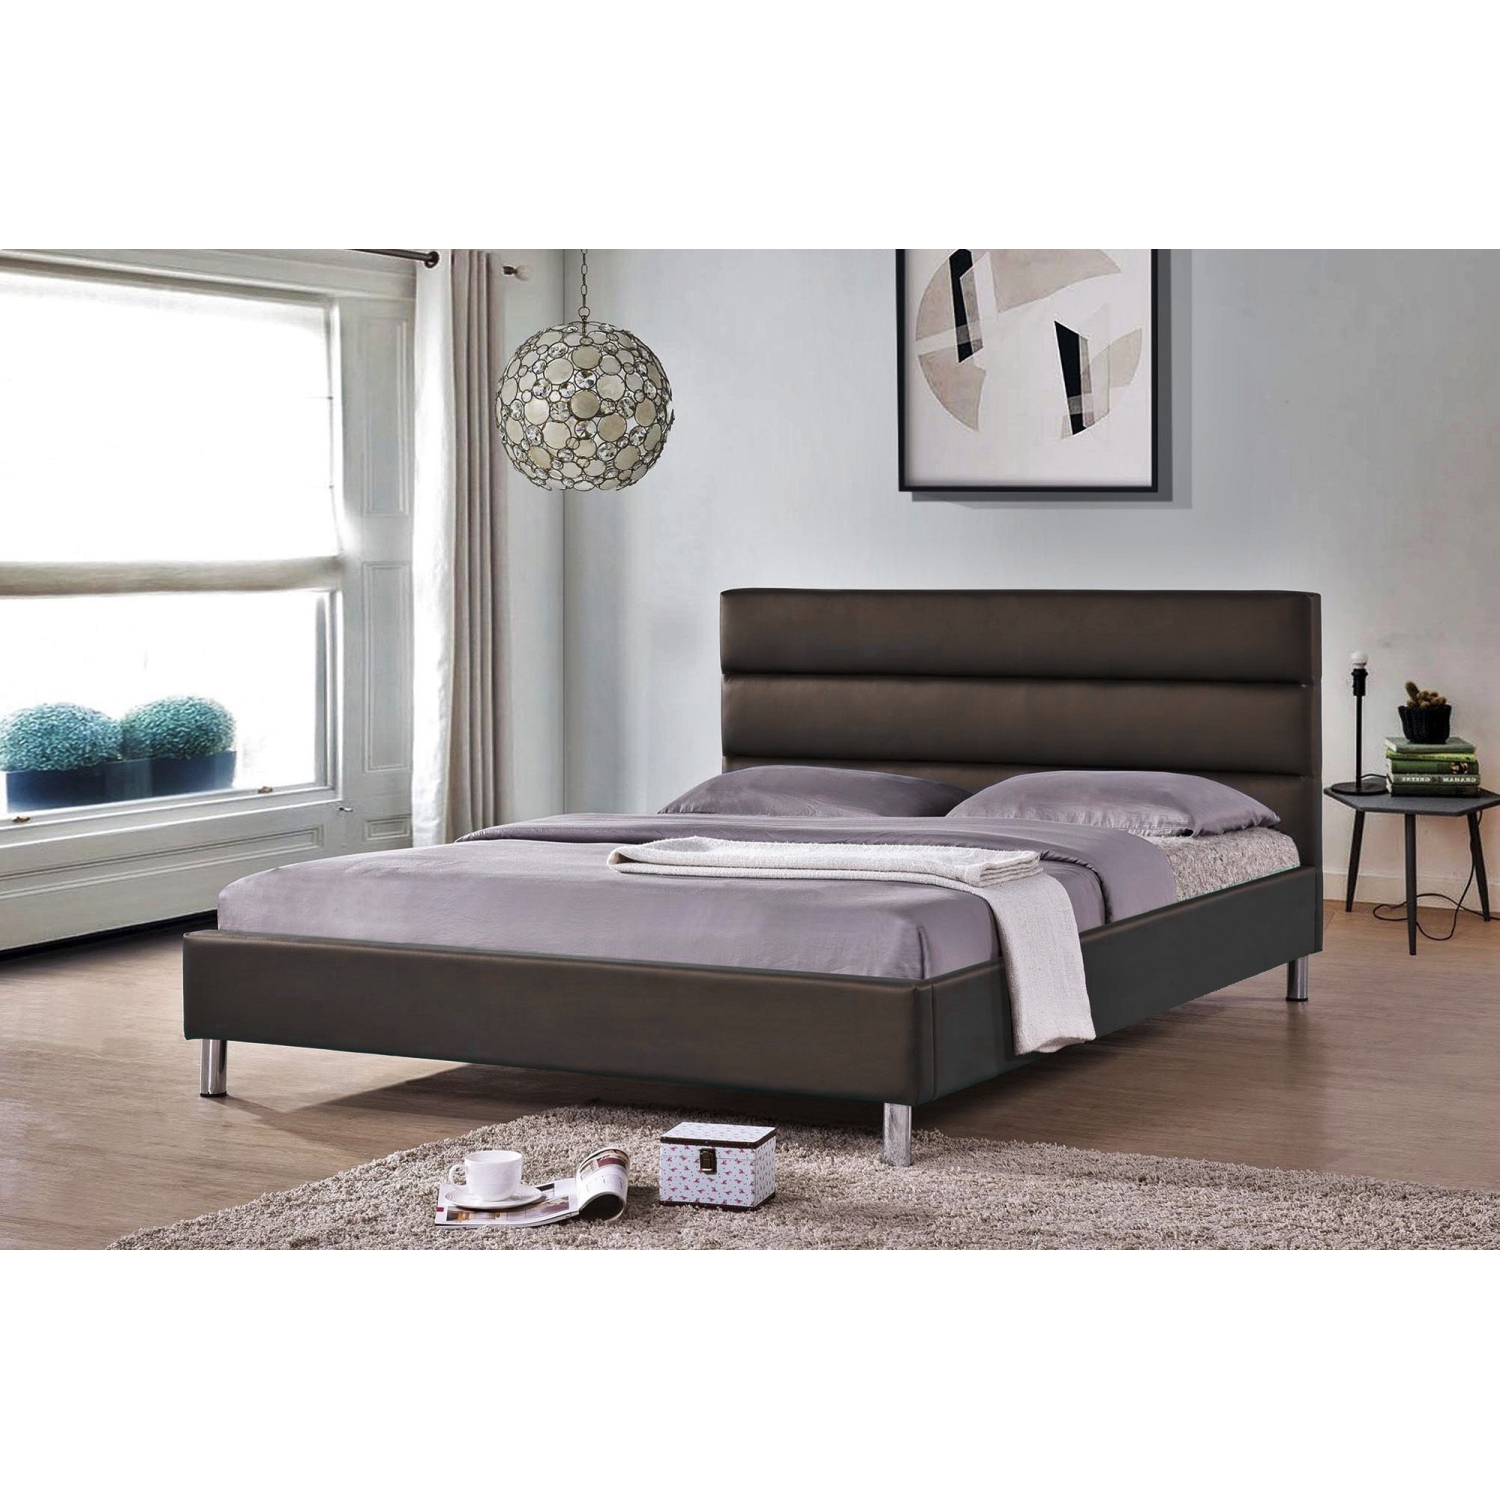 Espresso PU Upholstered King Size Platform Bed (No Box Spring Required)